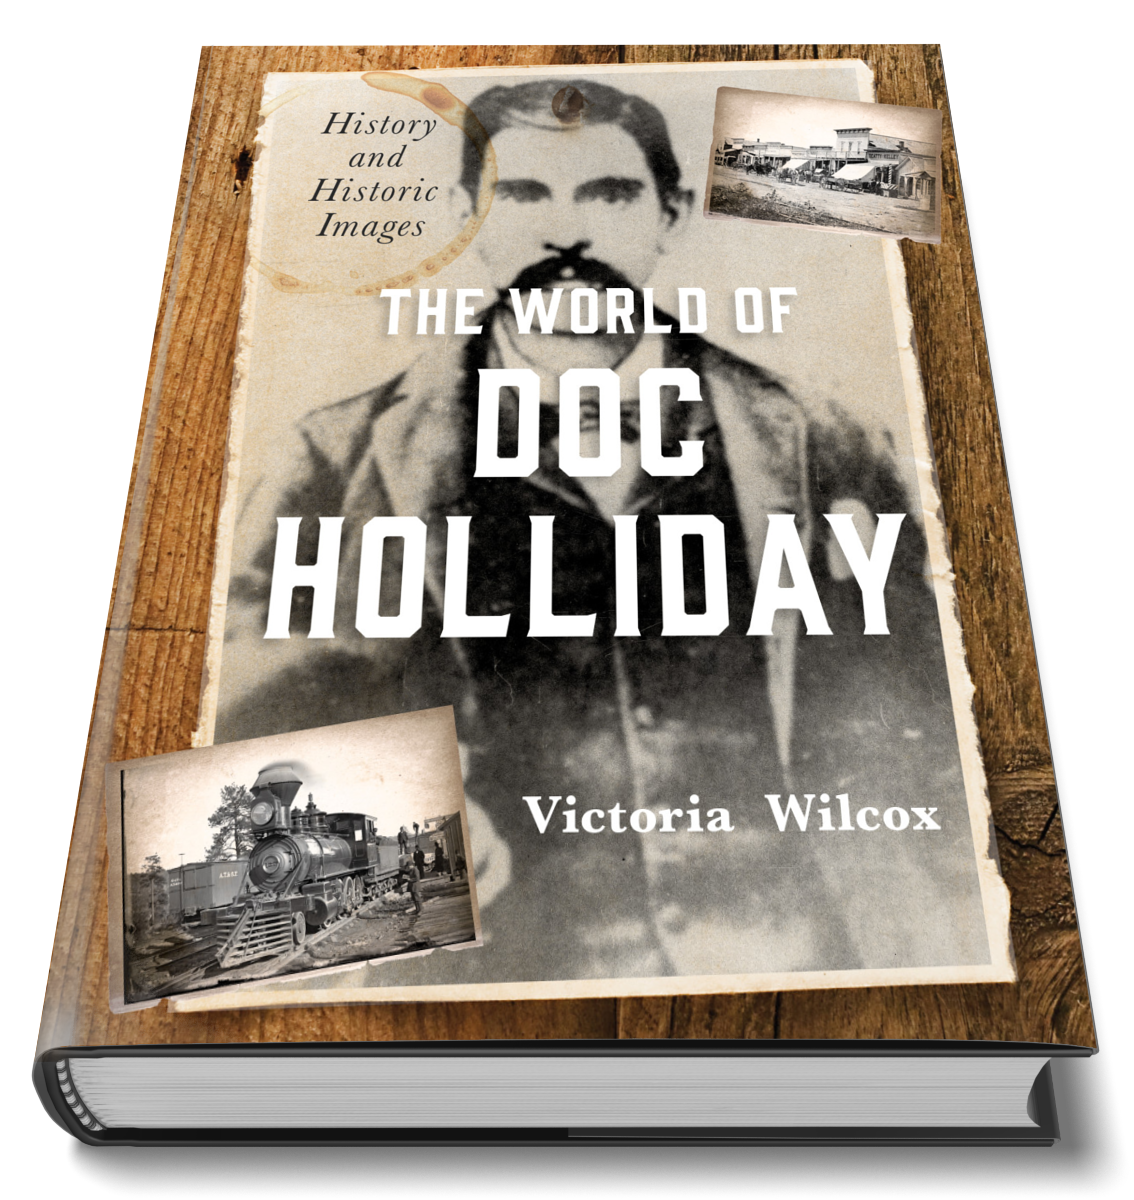 The World of Doc Holliday: History & Historic Images